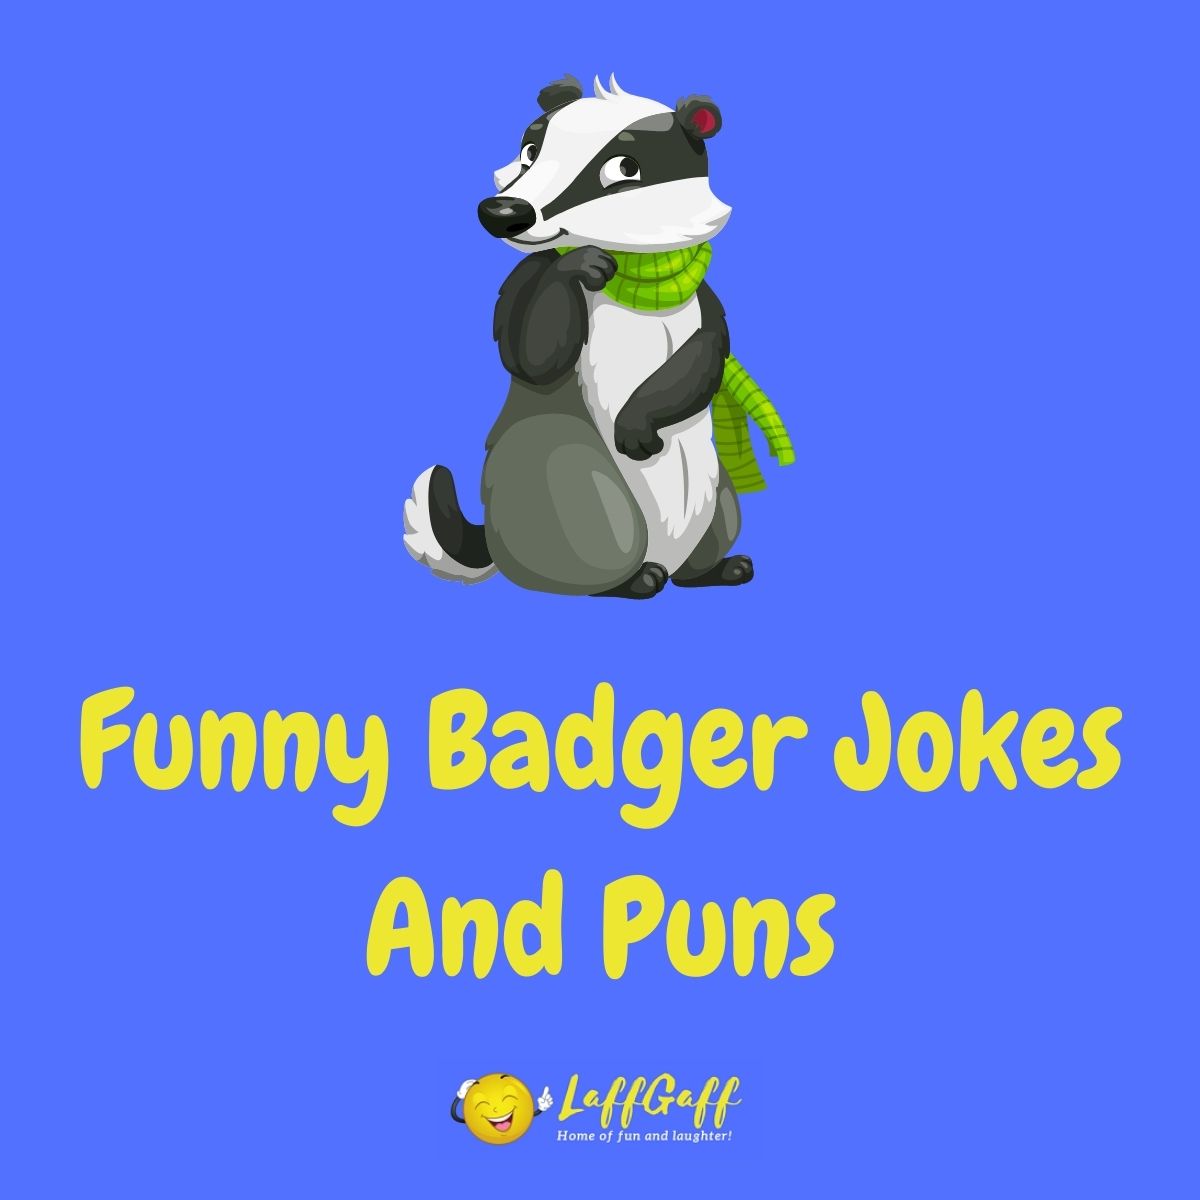 Featured image for a page of funny badger jokes and puns.